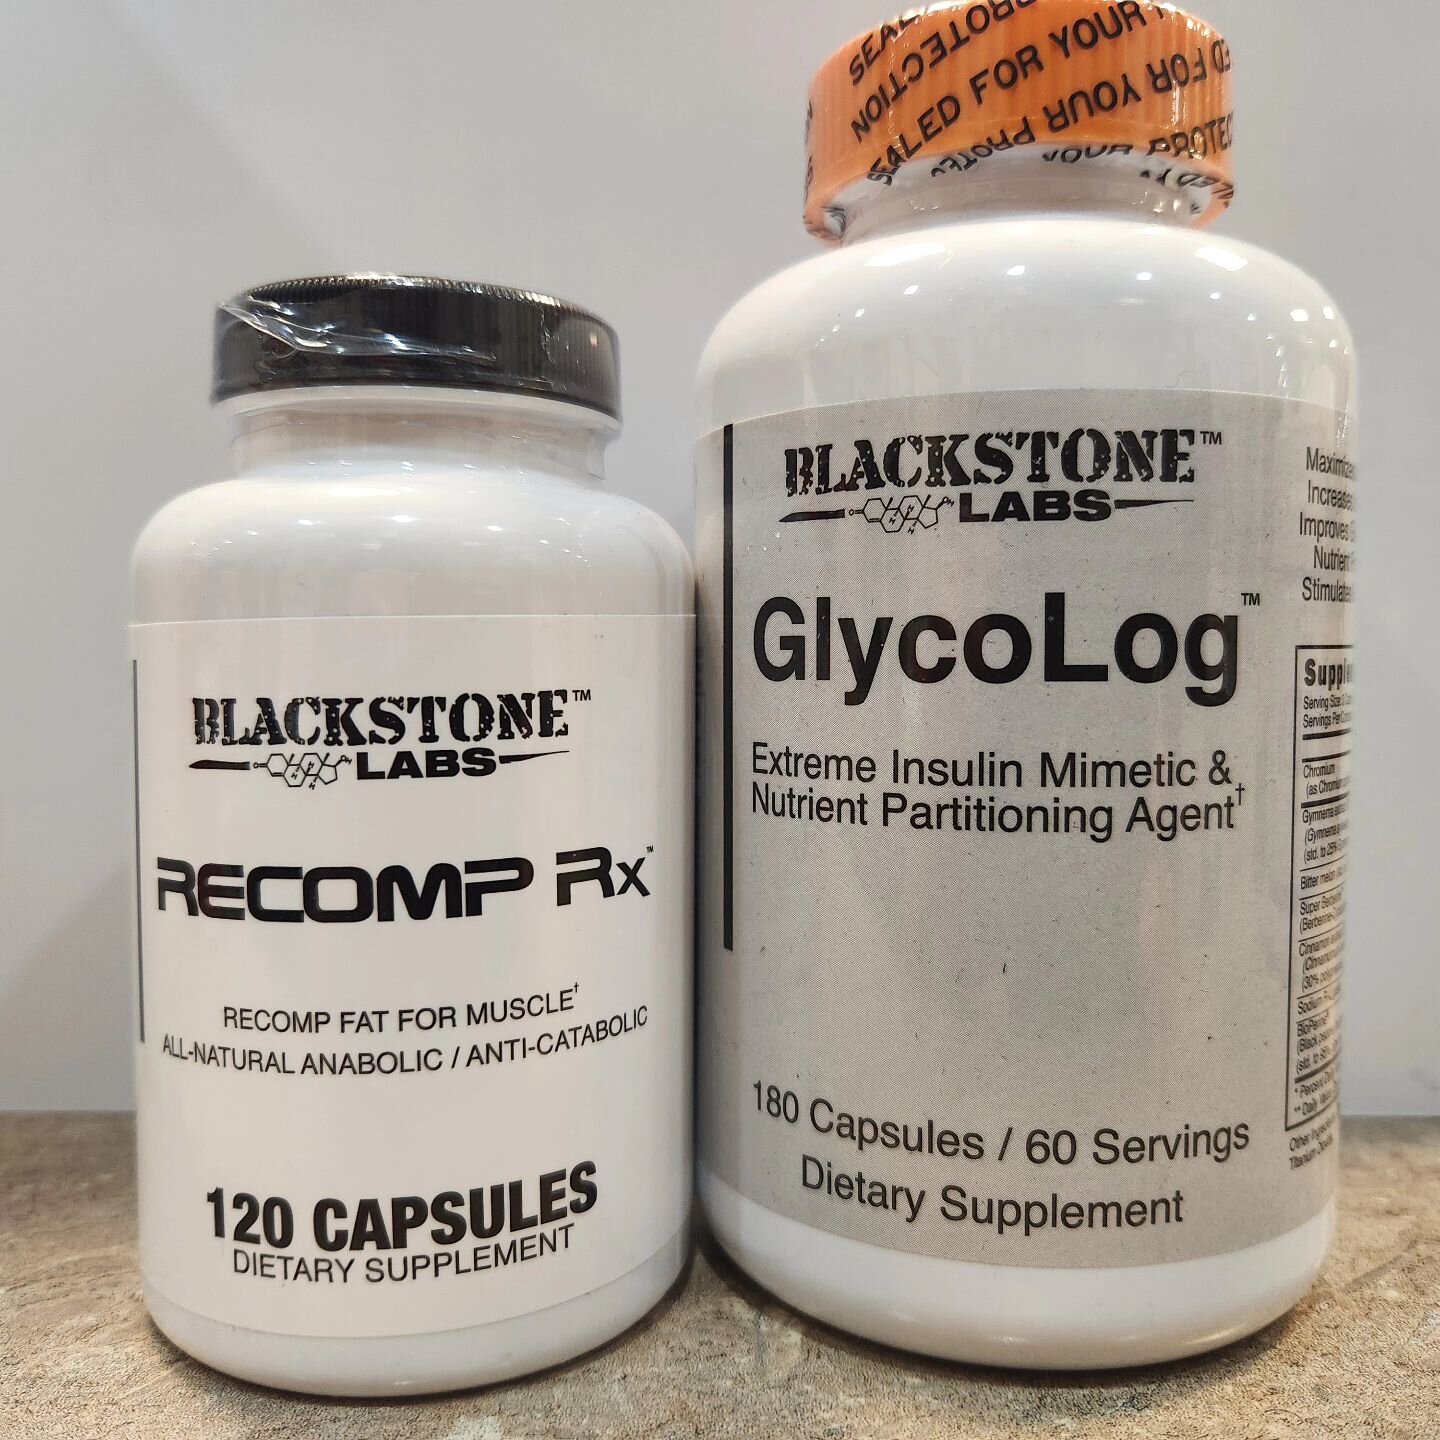 Our Tuesday Top Picks!

This great duo brought to you by @blackstone_labs
Glycolog, top tier glucose disposing agent, great for those heavy foods, cheat meals, and anytime you need a little boost in breakdowns.
Recomp Rx, helps you with reverse dieti